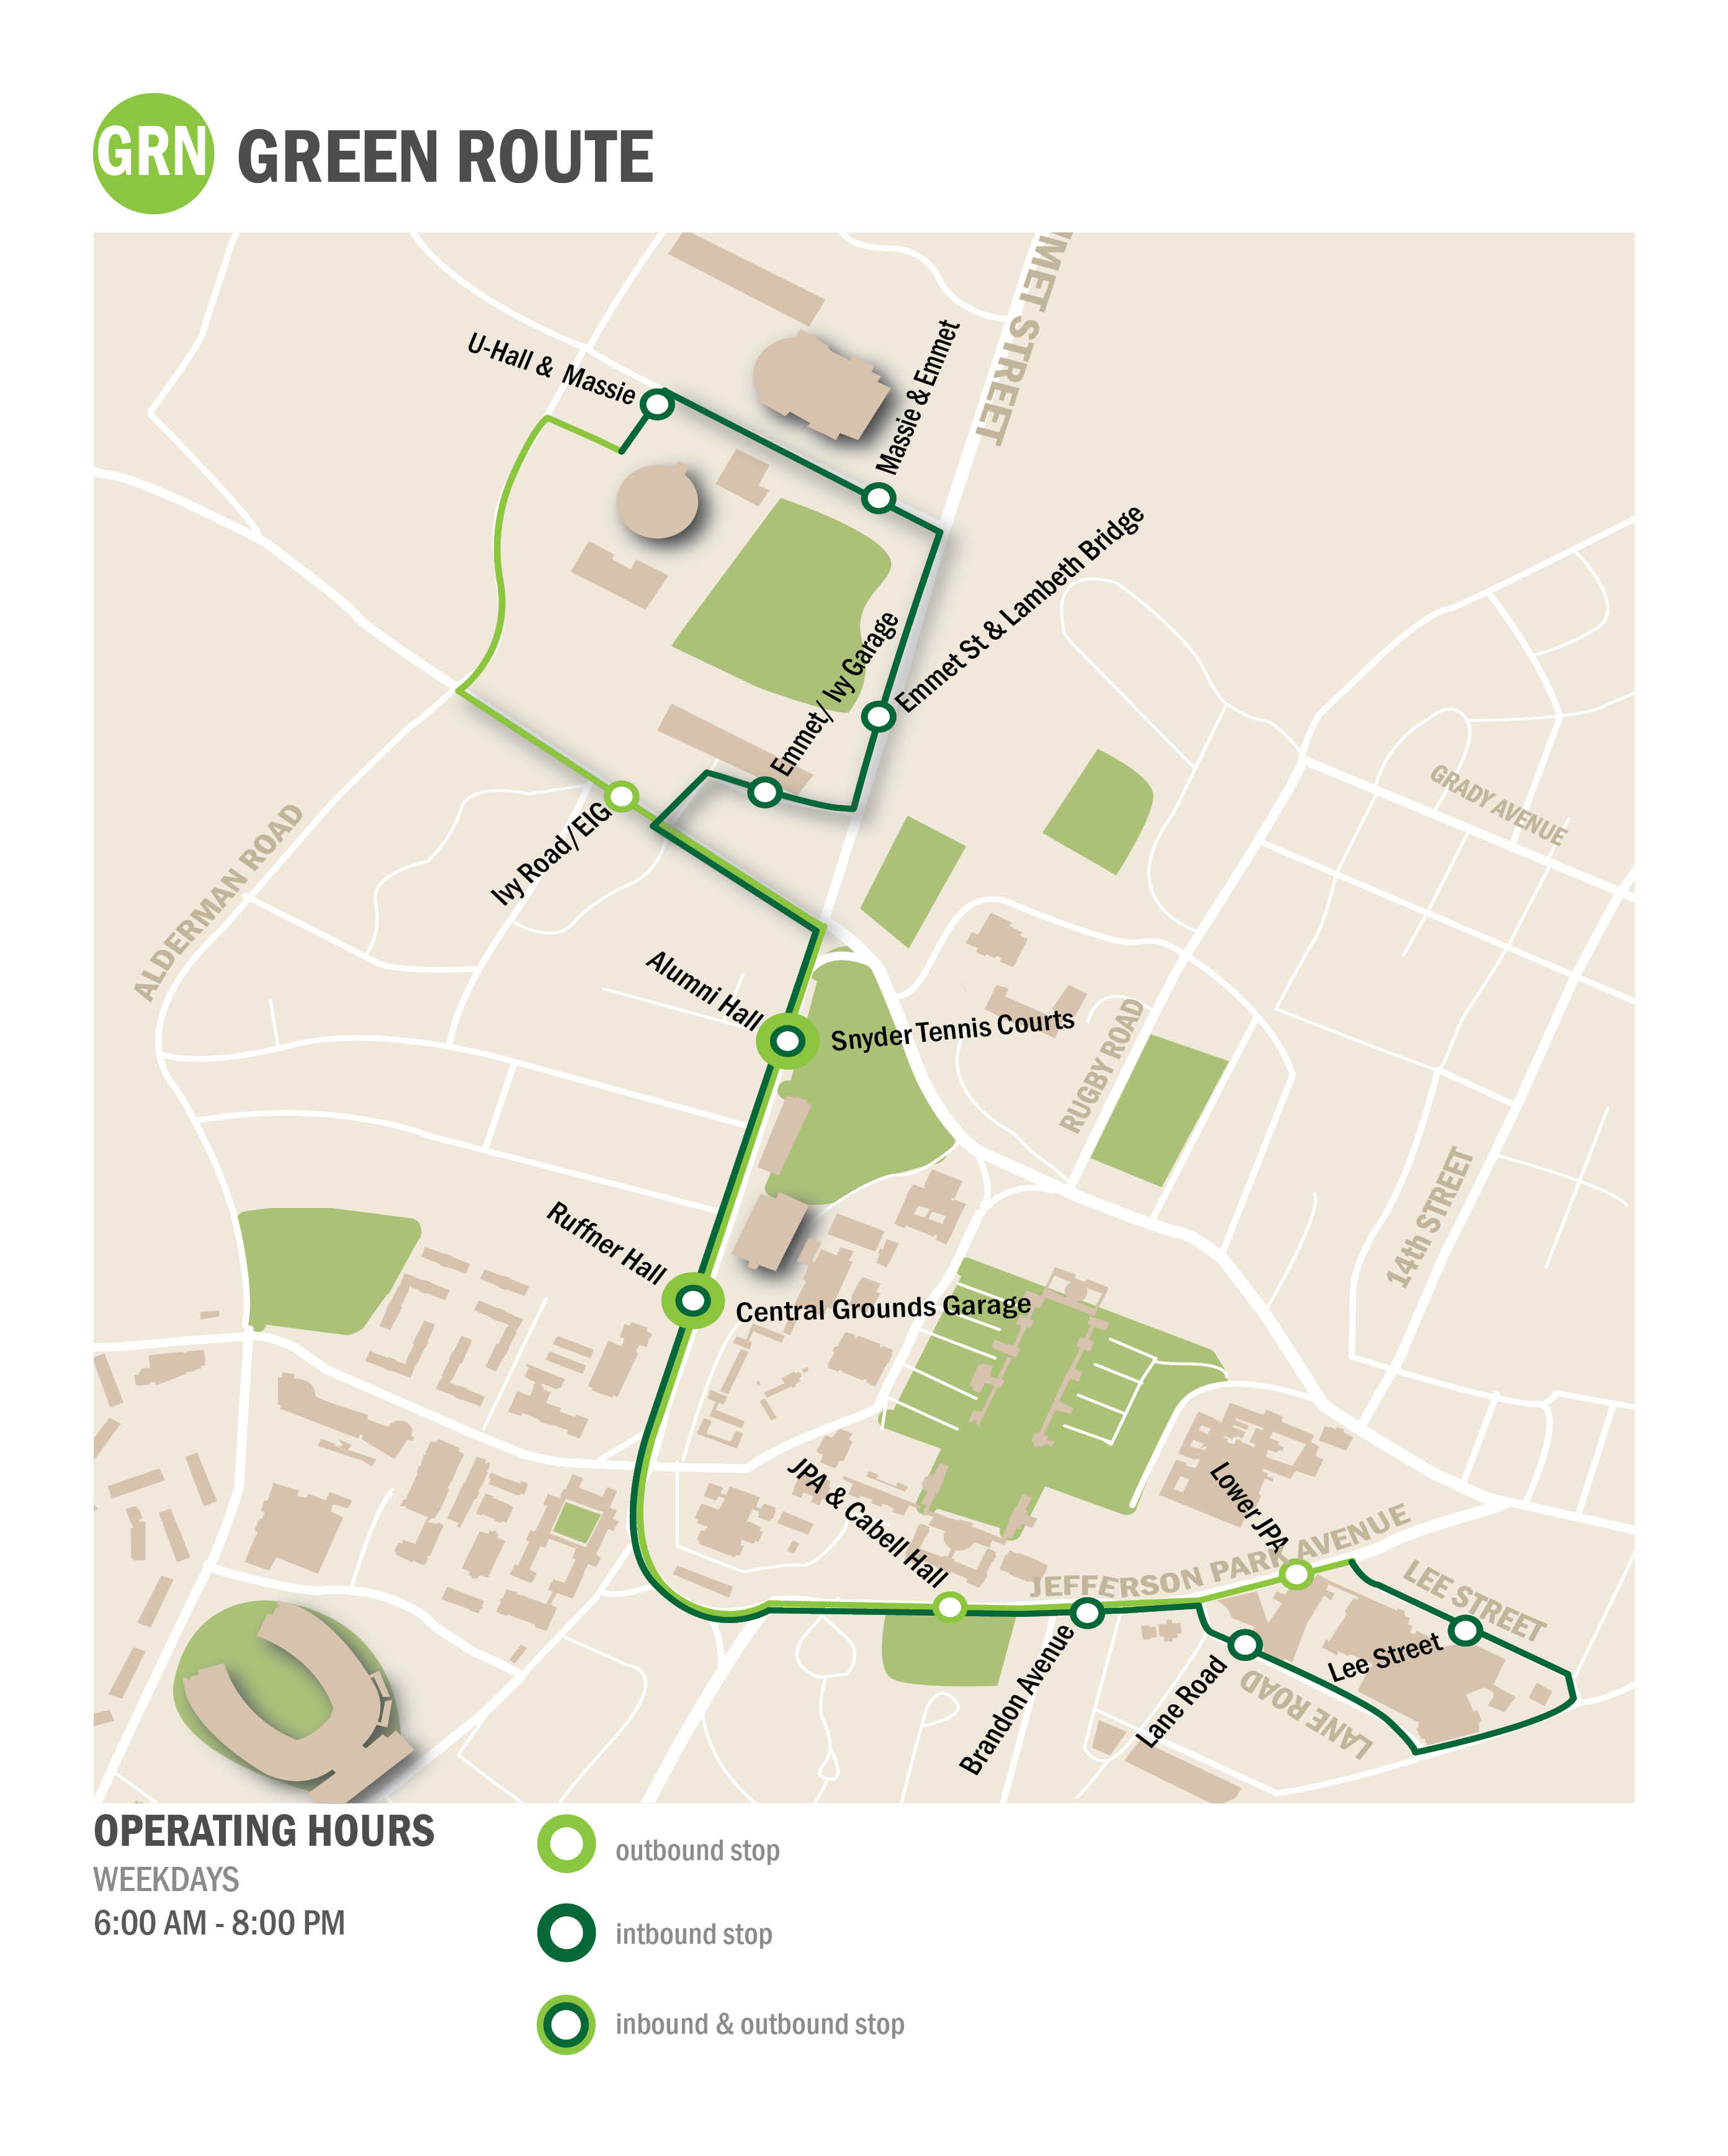 Green Route, Parking and Transportation